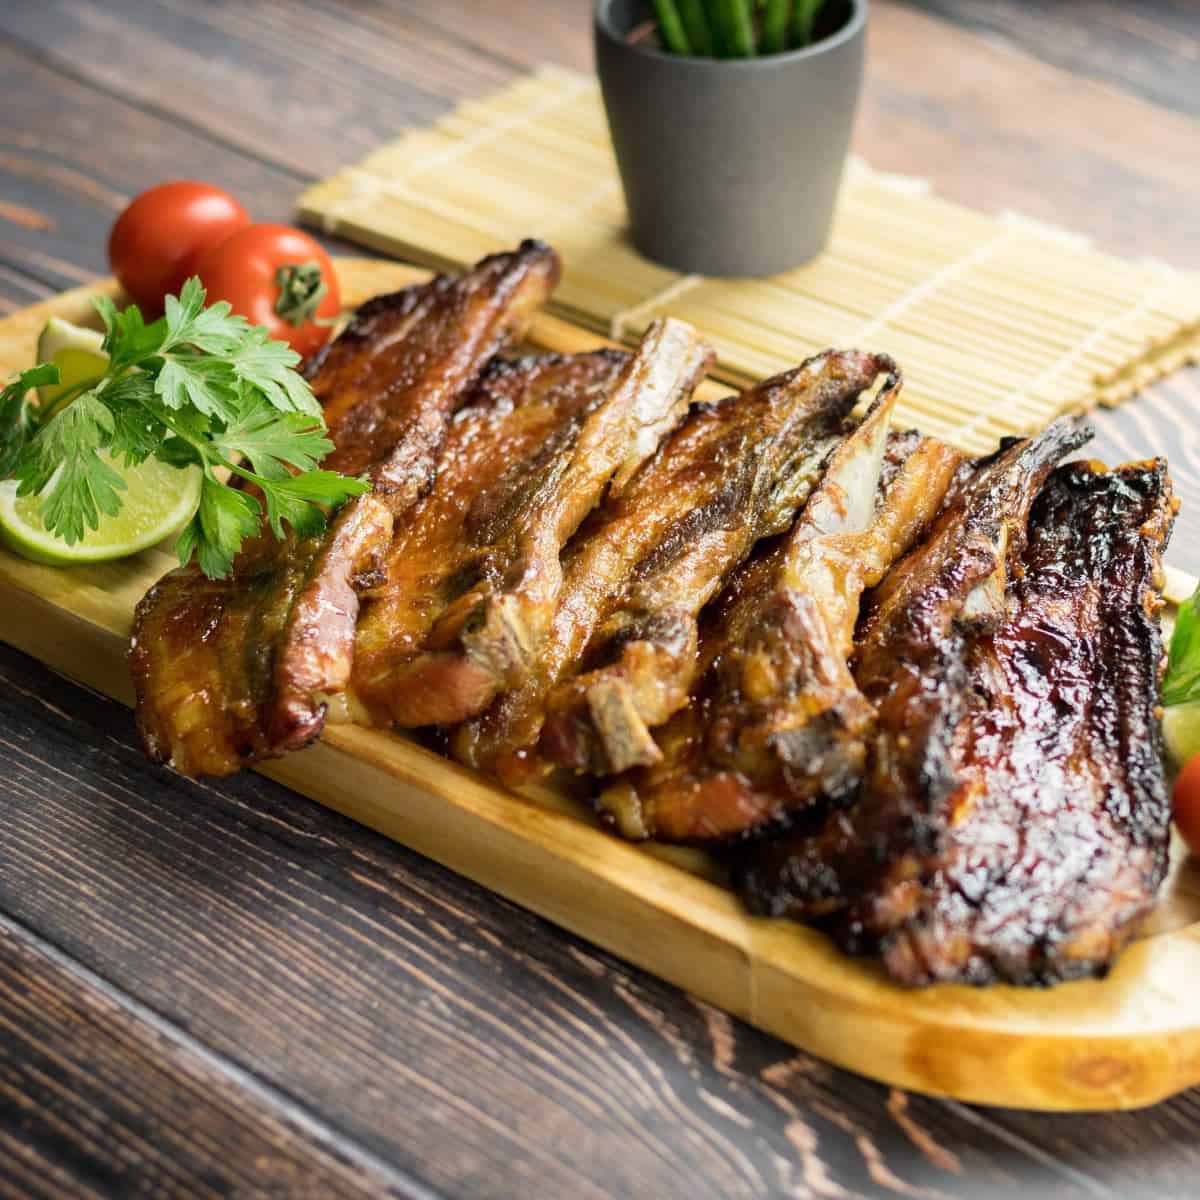 Keto smoked pork ribs presented on a wooden platter garnished with lemon wedges, tomatoes and fresh green herbs.